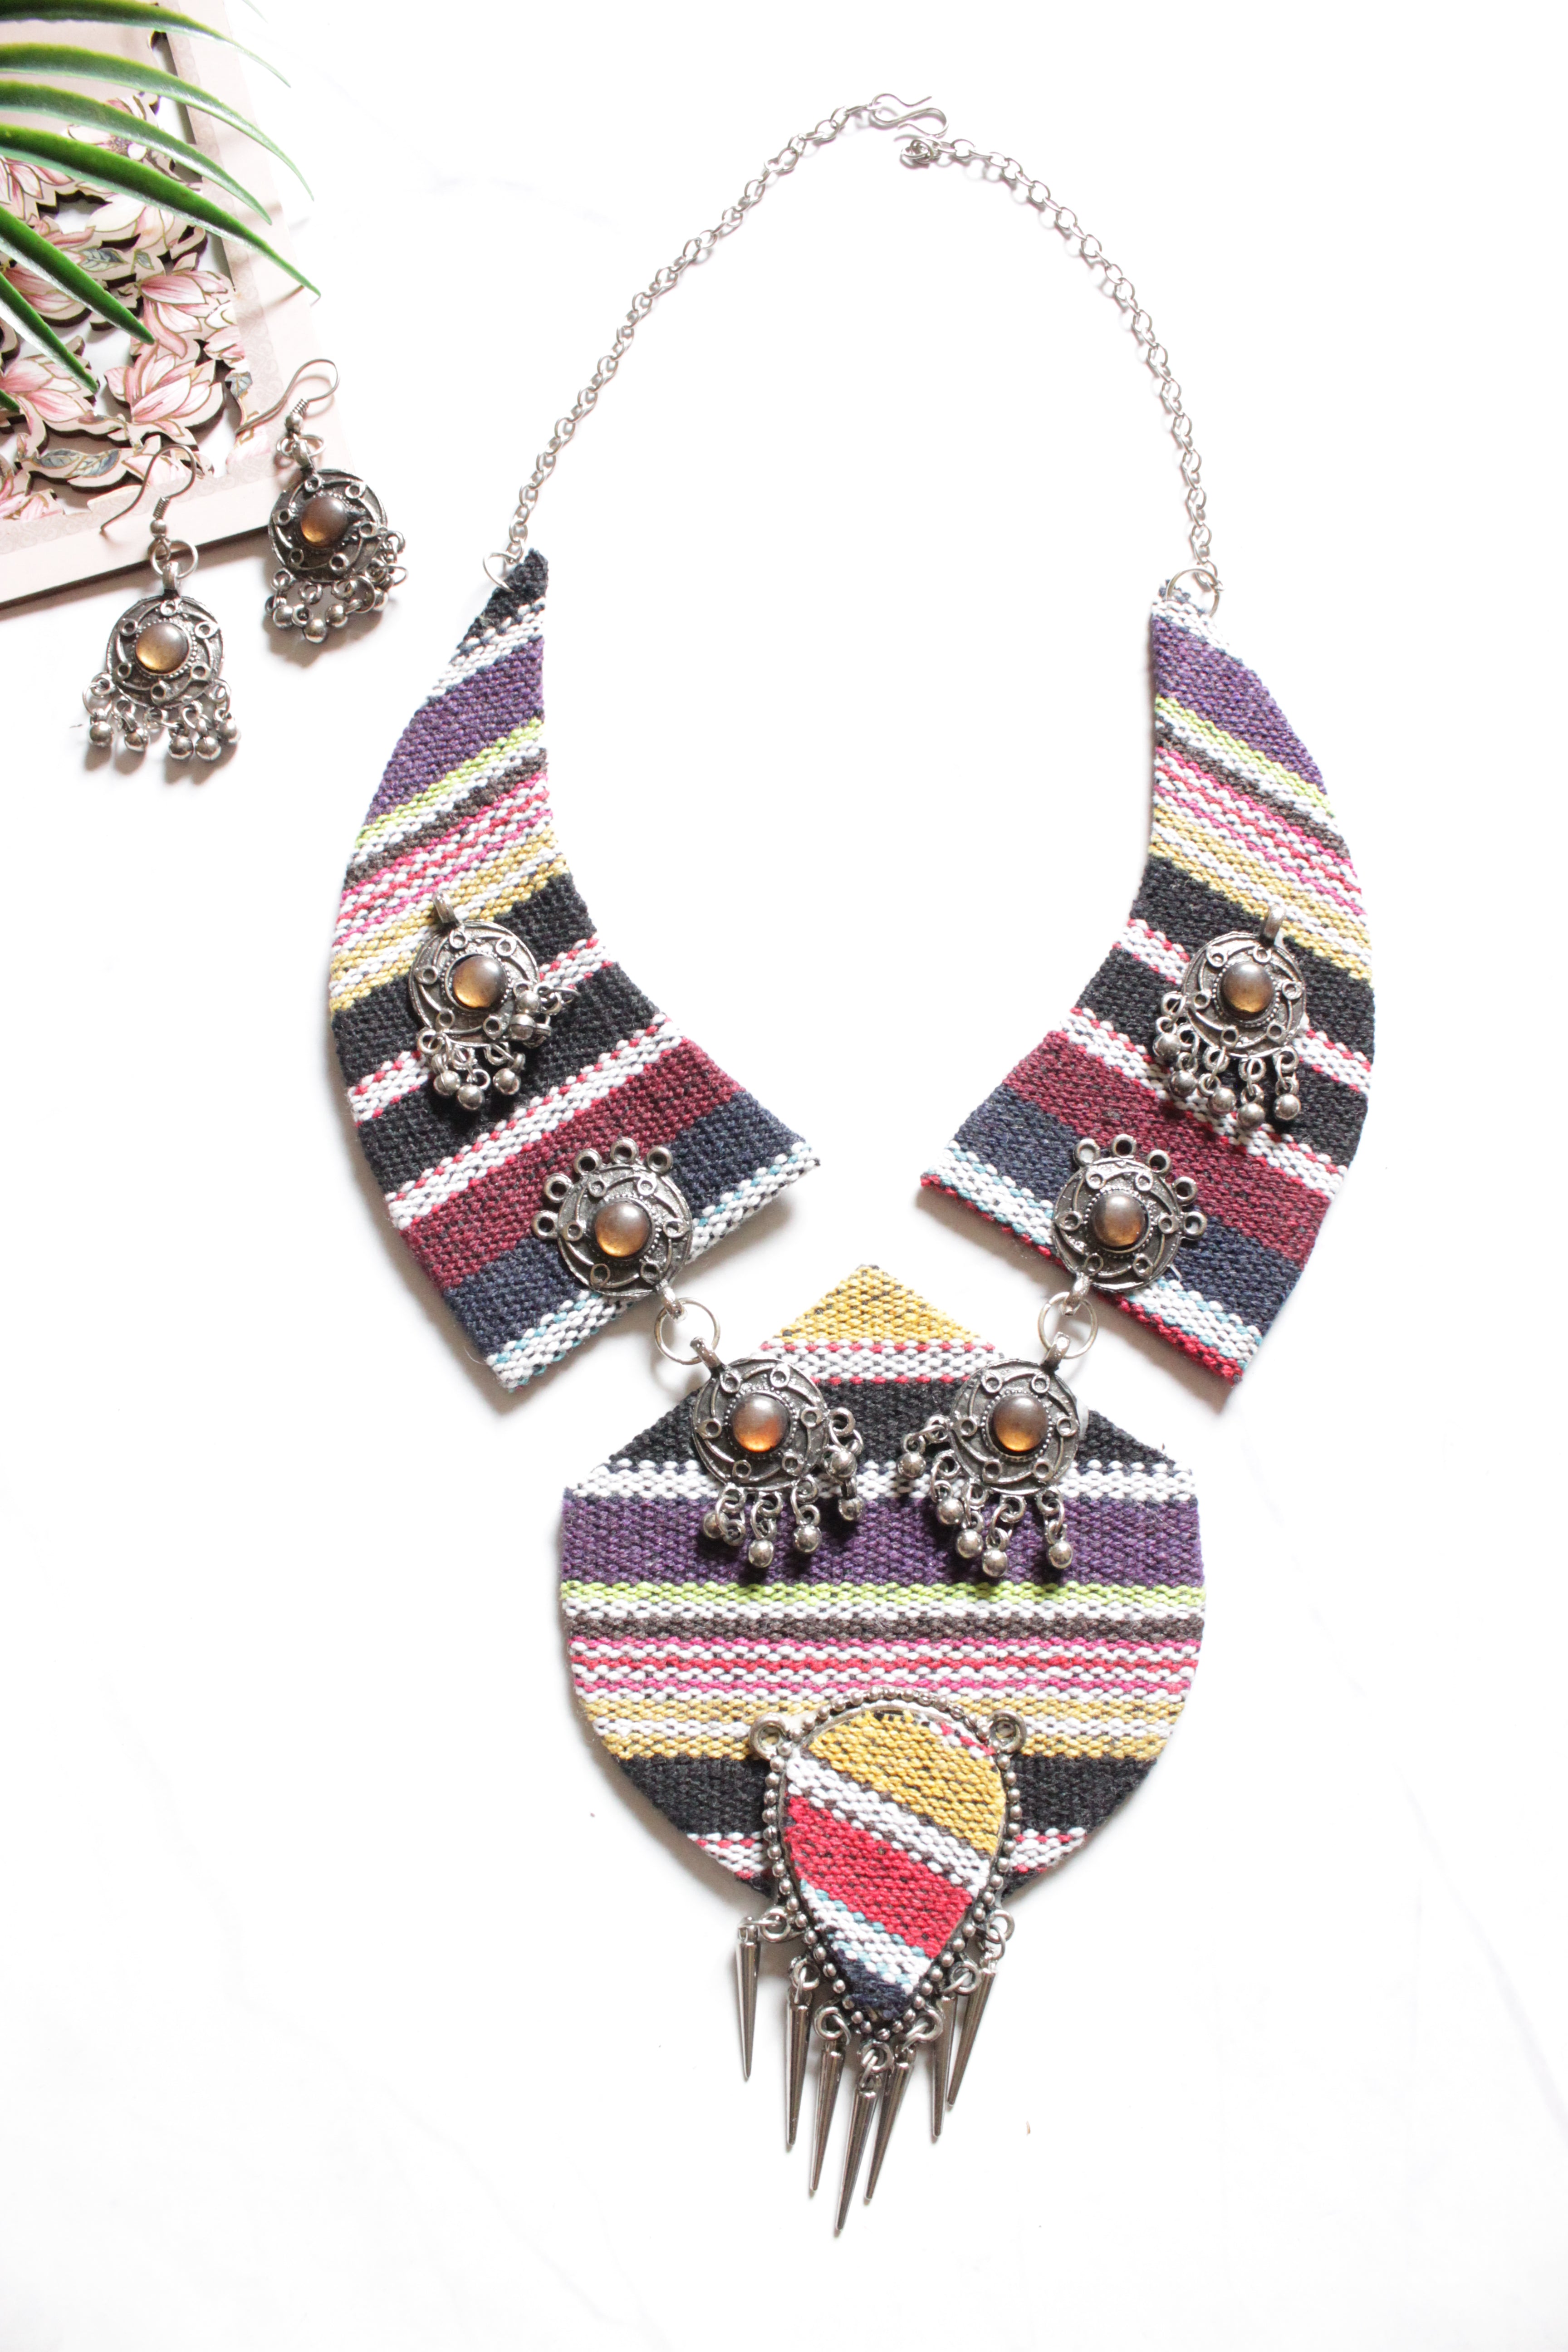 Jute Tribal Fabric Necklace Set Embellished with Oxidised Silver Metal Charms